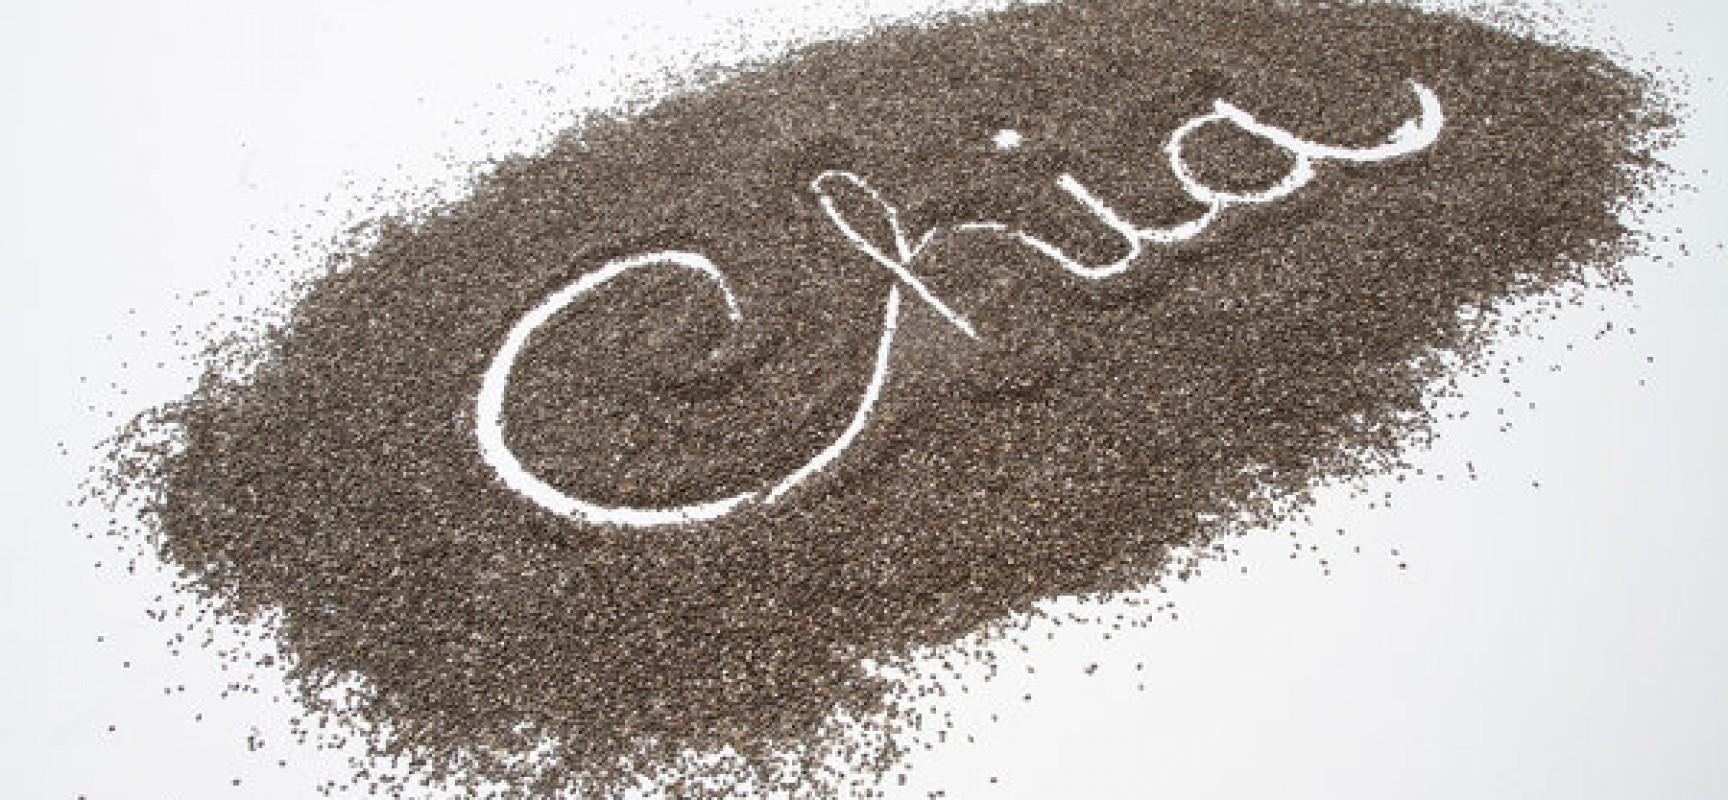 CHIA SEEDS. Have you tried it?